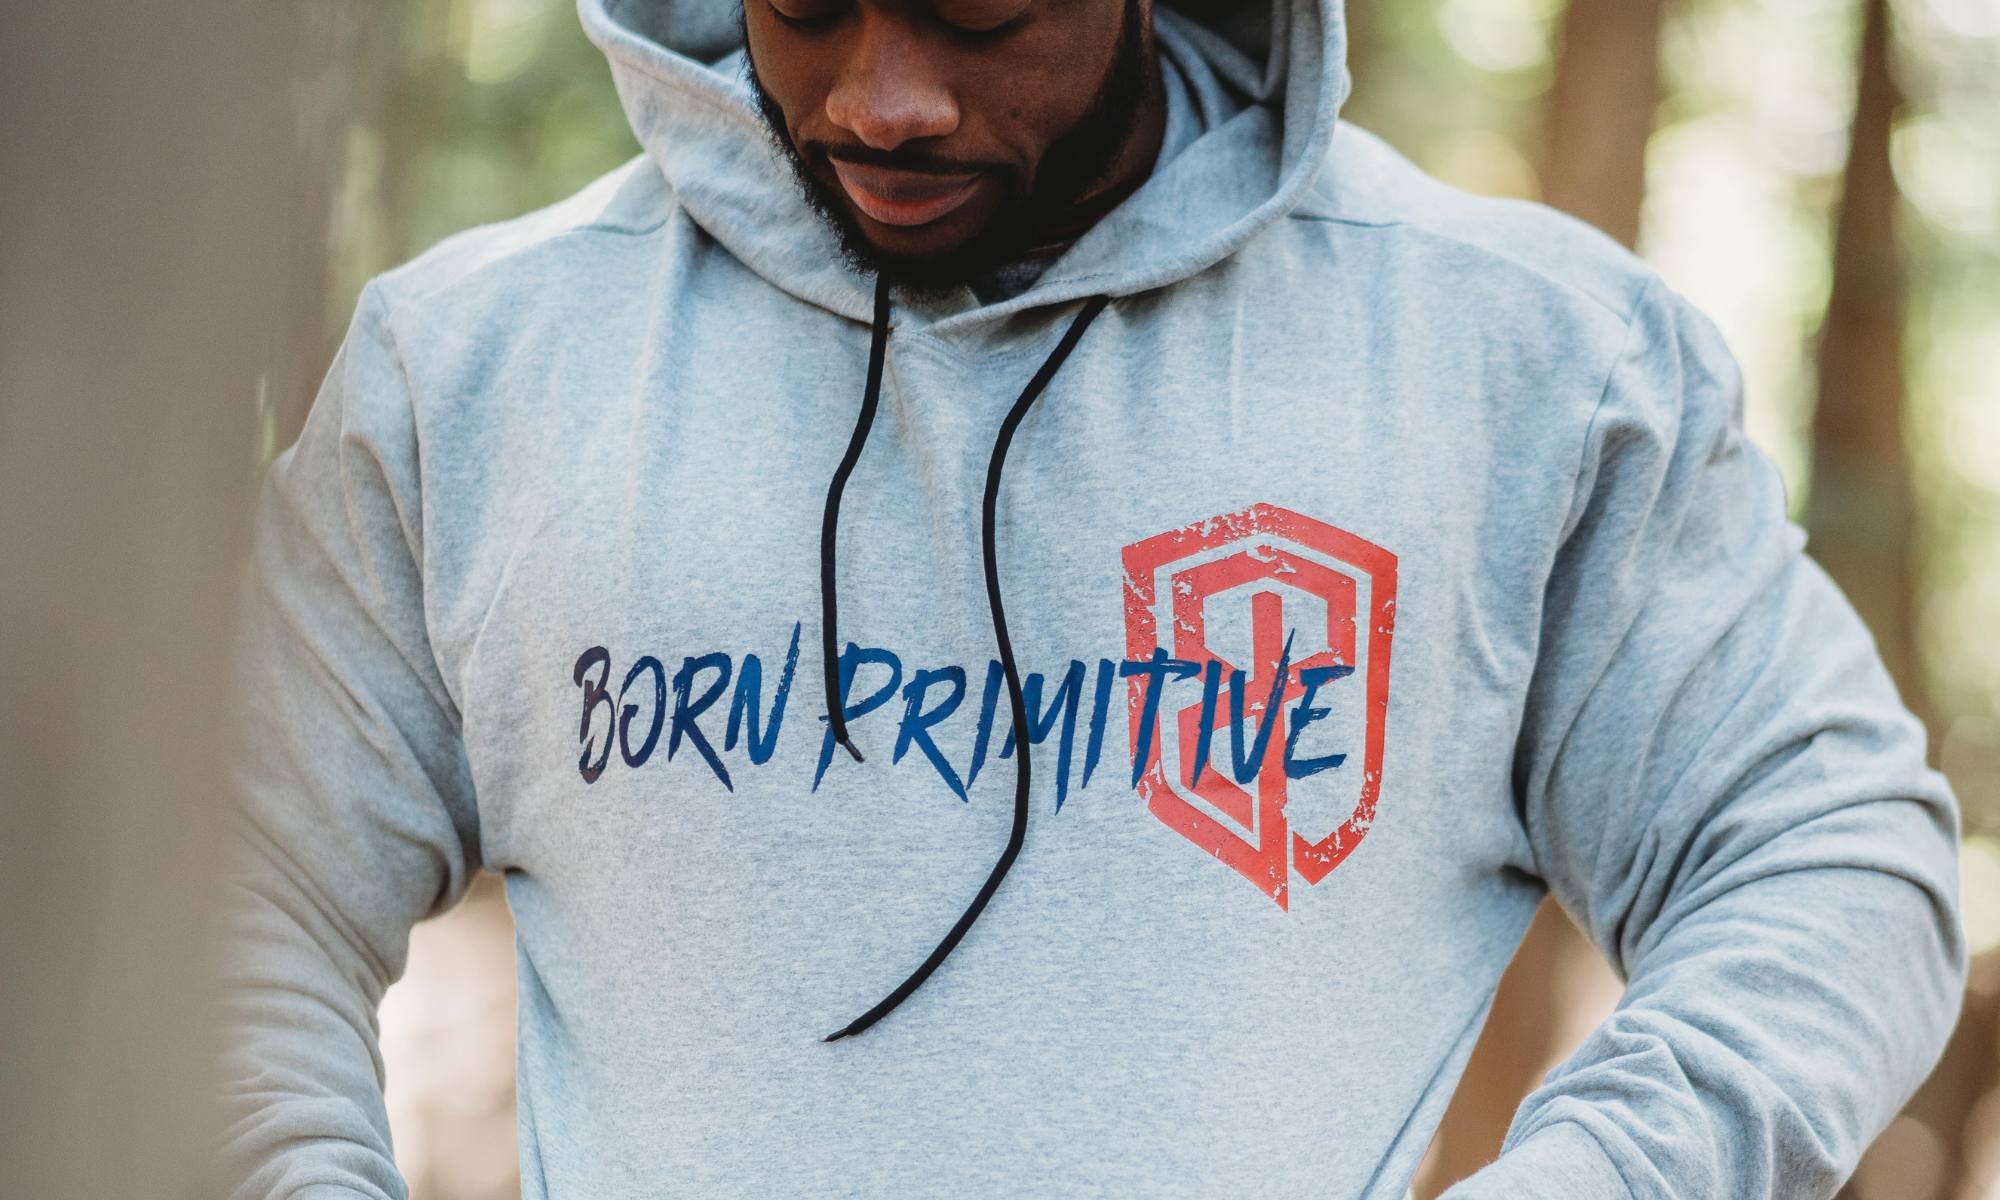 Man wearing a light grey heather hoodie with a navy and red typographic logo printed along the chest.